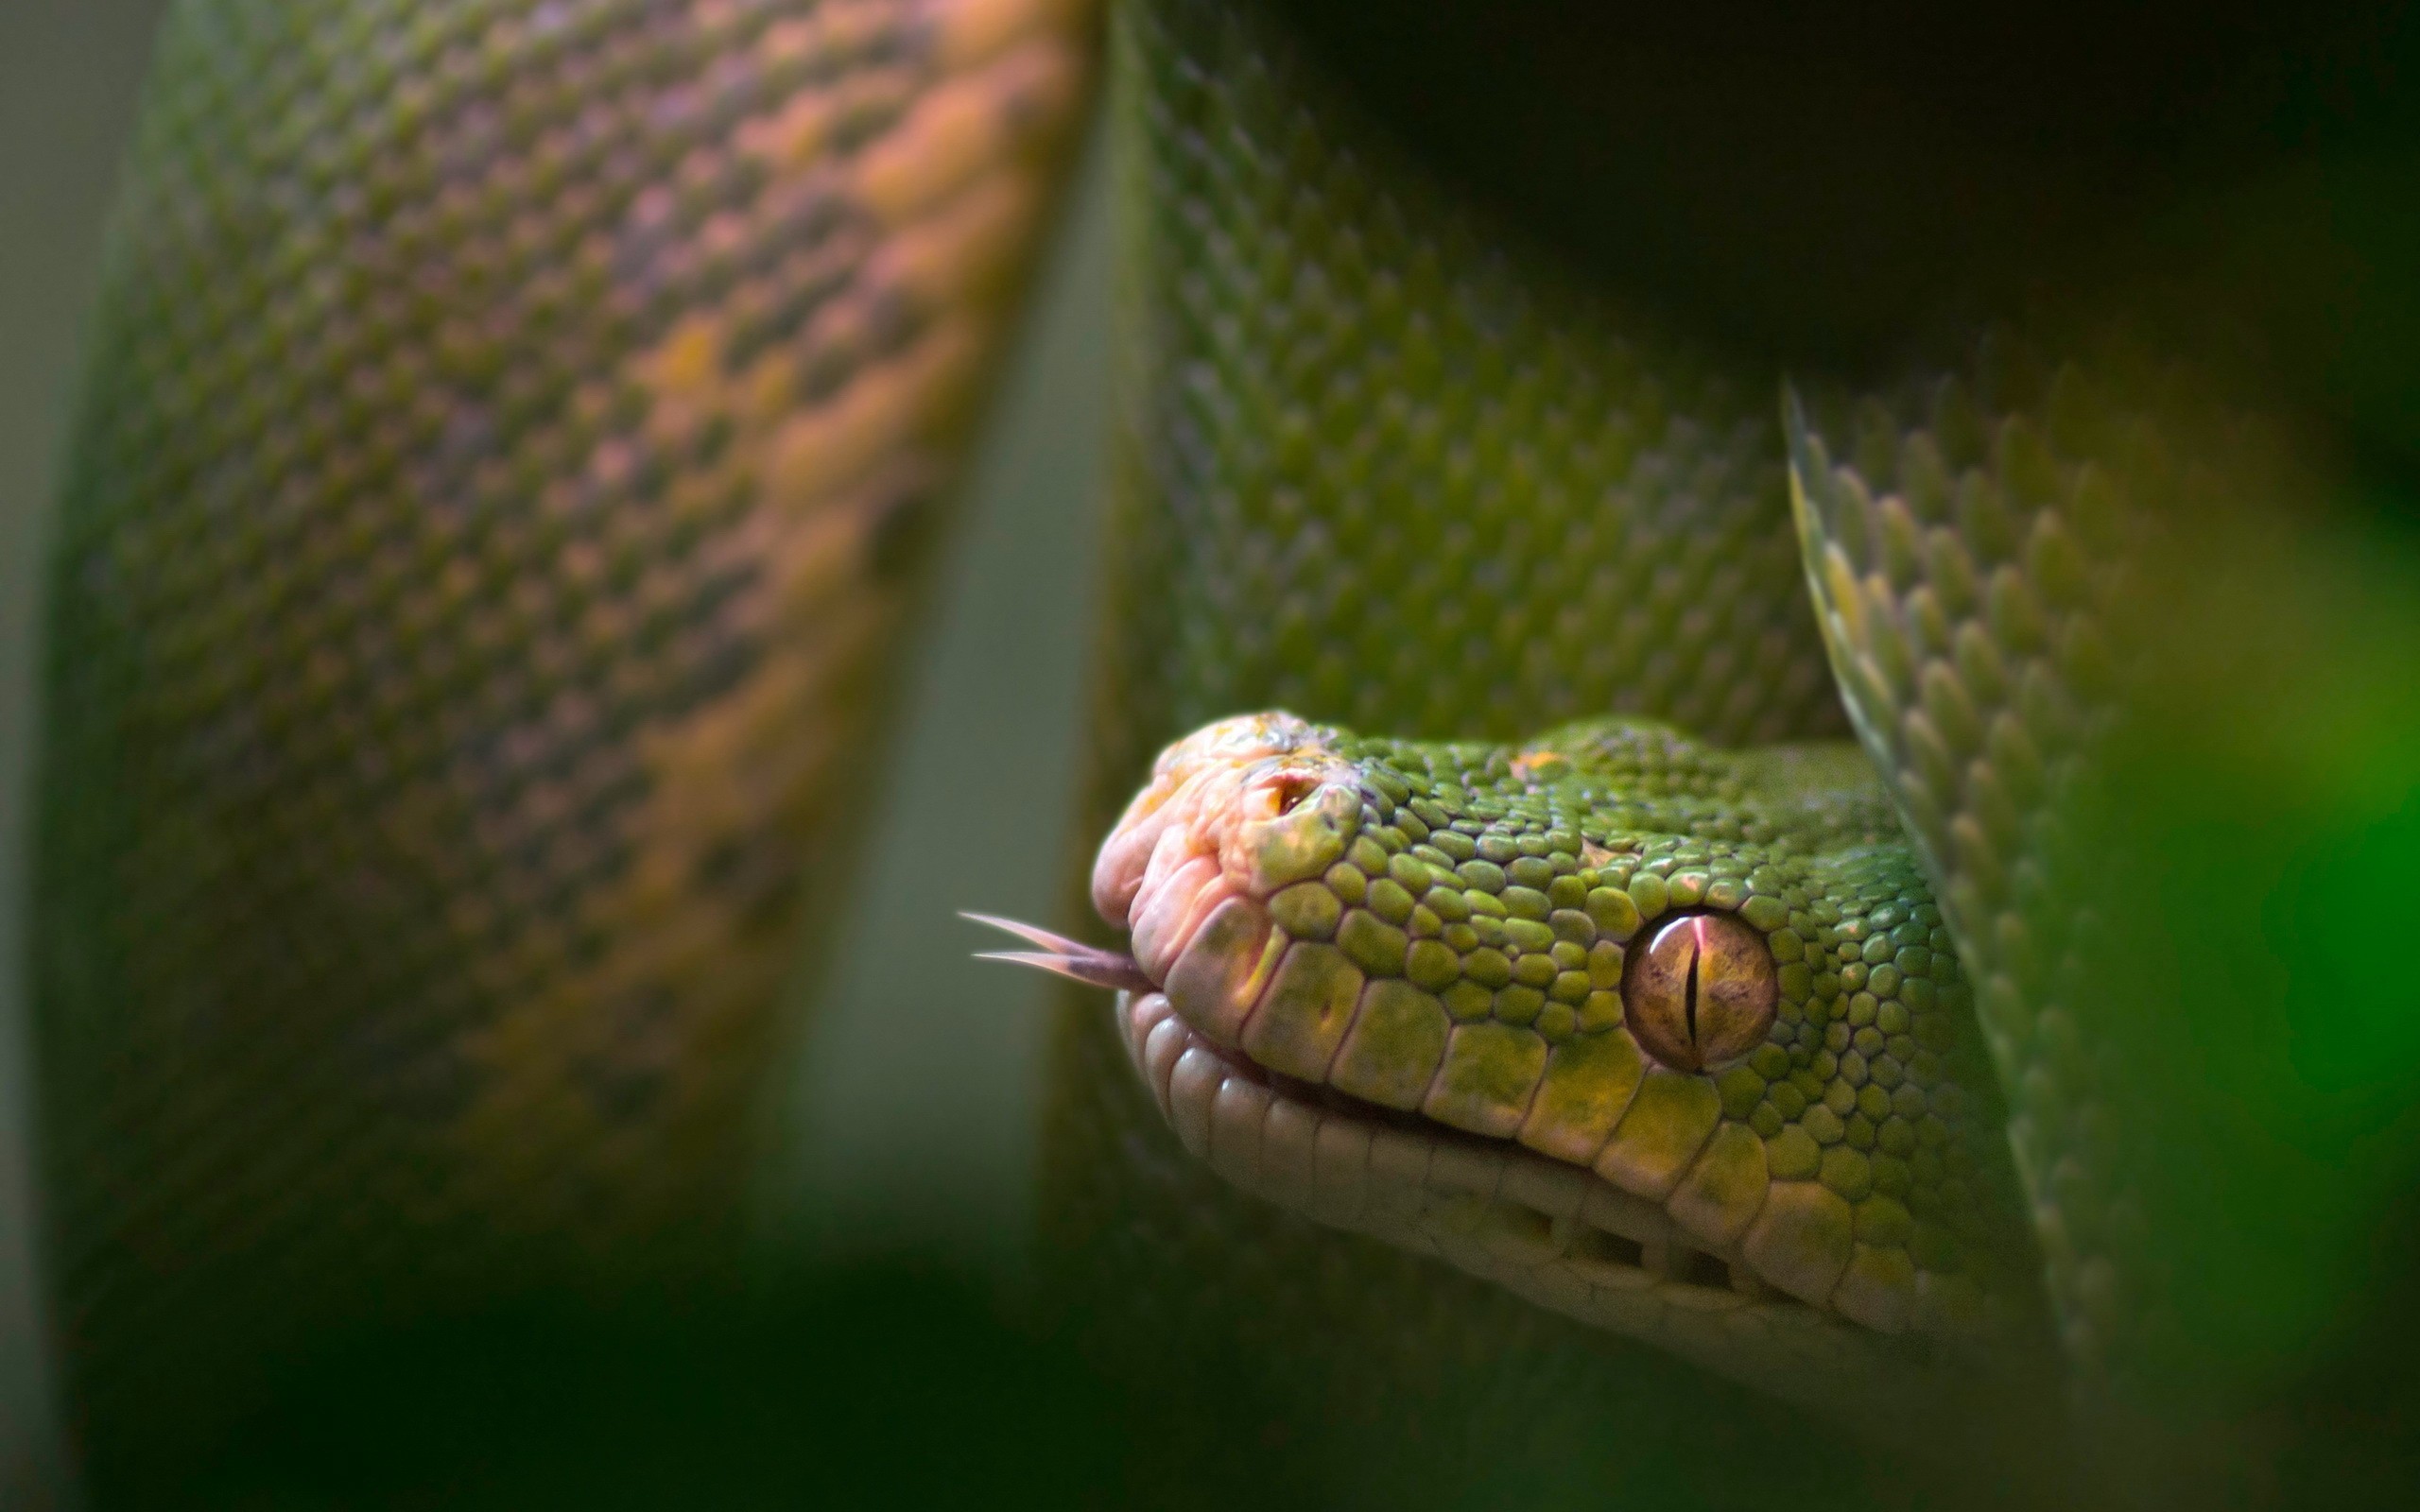 2560x1600 Snake Reptile Tongue Blurring - Free Stock Photos, Images, HD Wallpaper